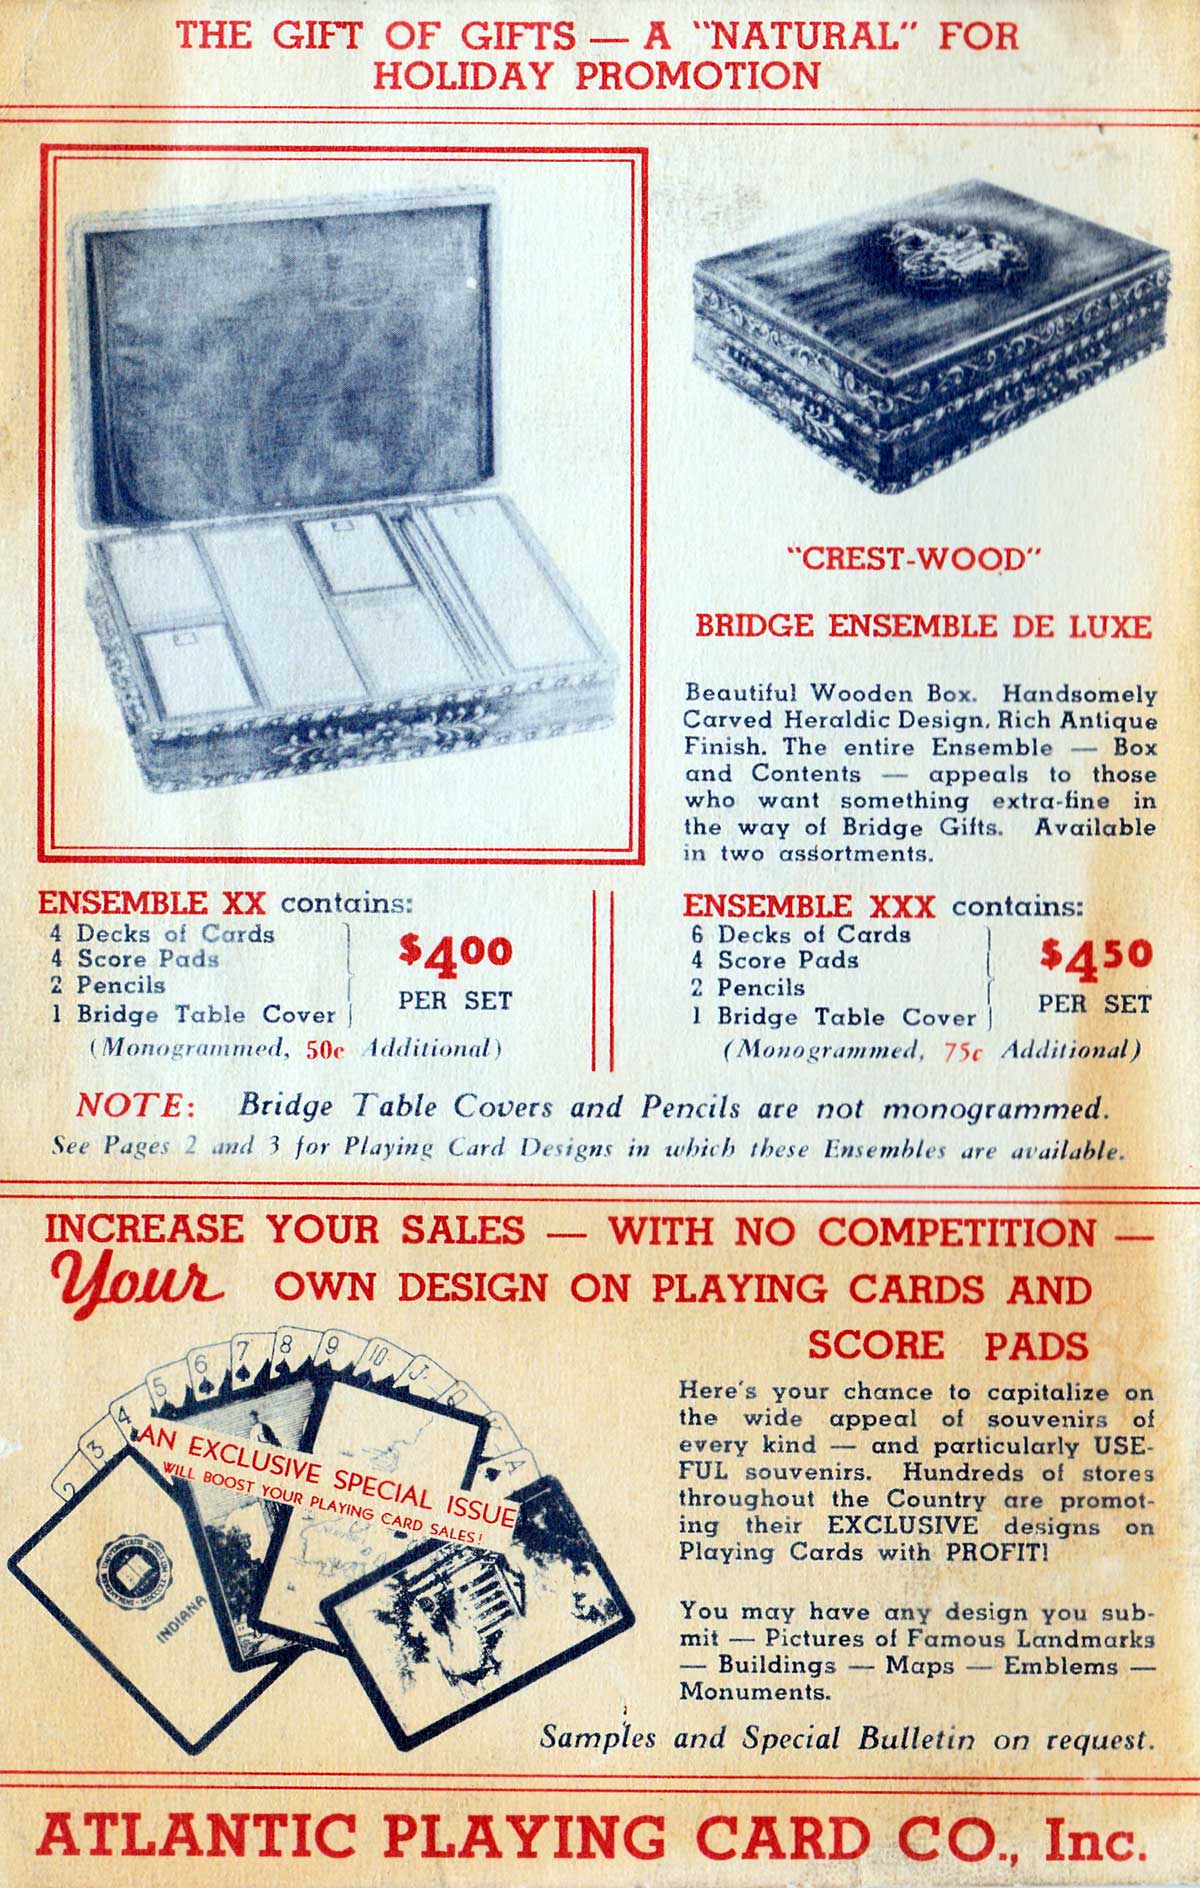 Trade catalogue by Atlantic Line Playing Card Co., Inc., c.1930s